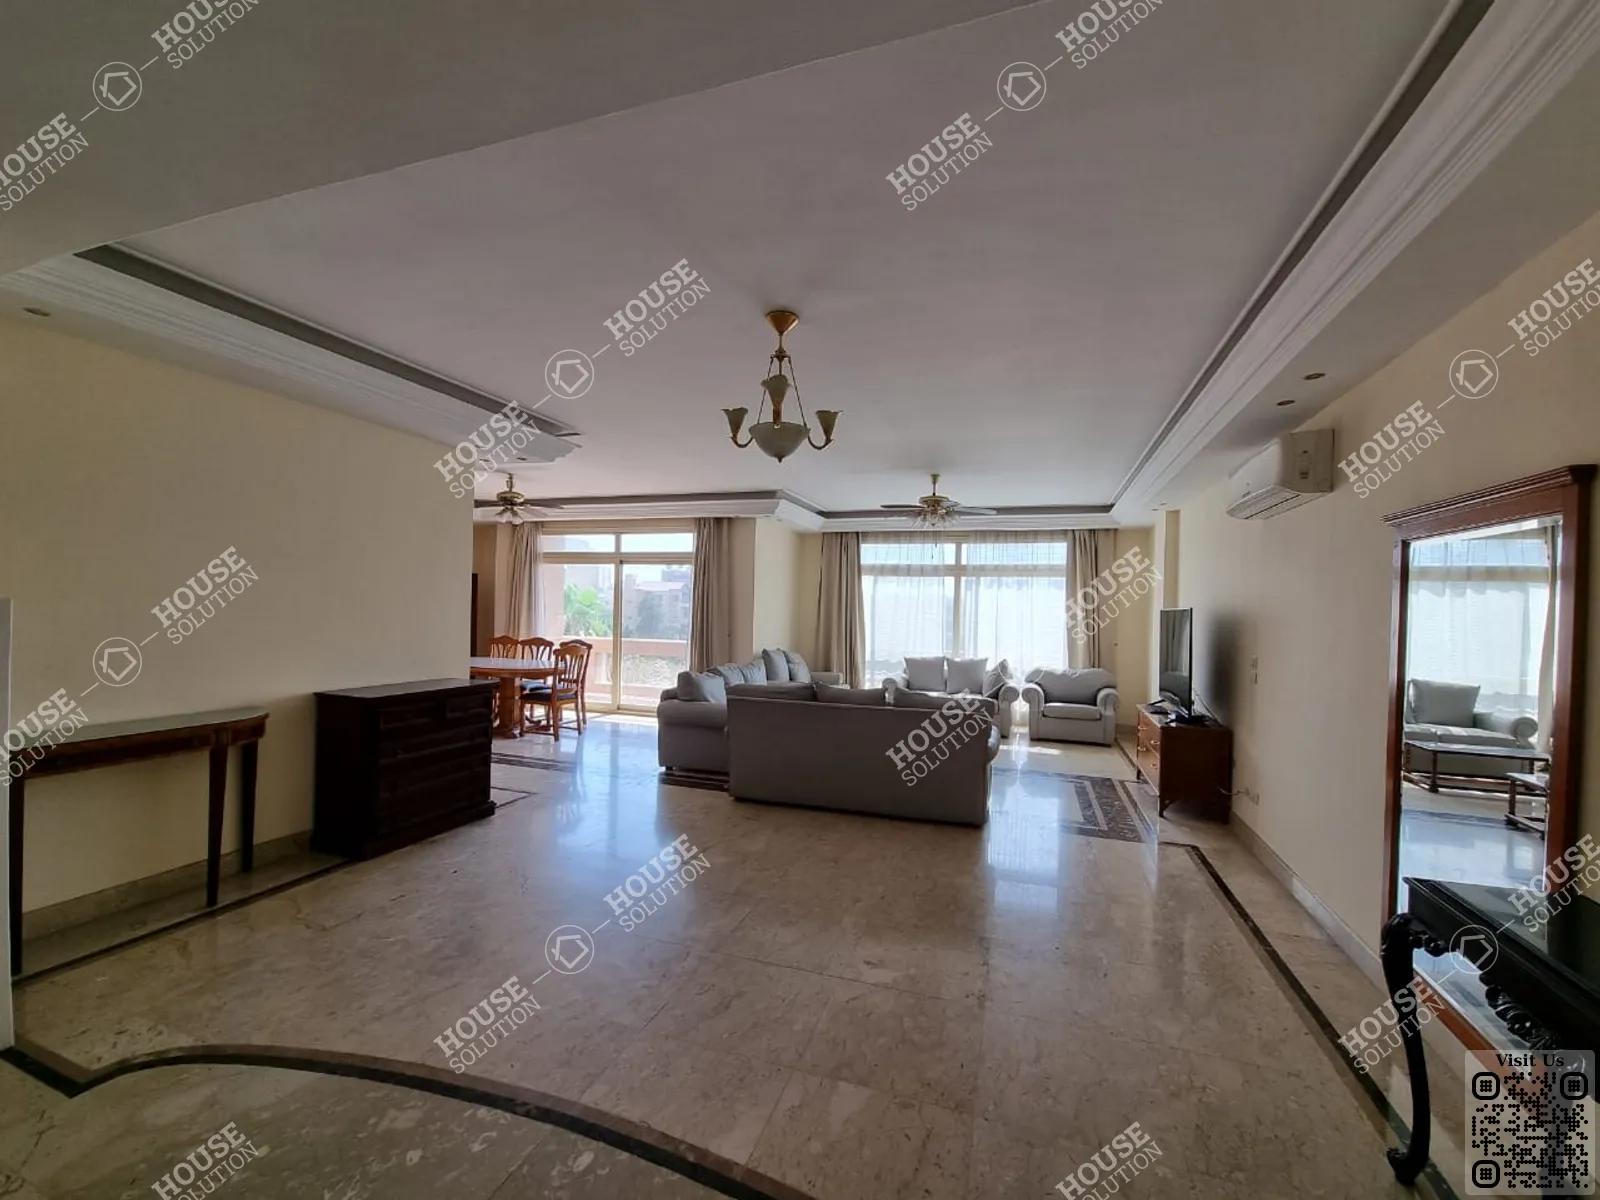 RECEPTION  @ Apartments For Rent In Maadi Maadi Degla Area: 350 m² consists of 4 Bedrooms 4 Bathrooms Modern furnished 5 stars #5510-0